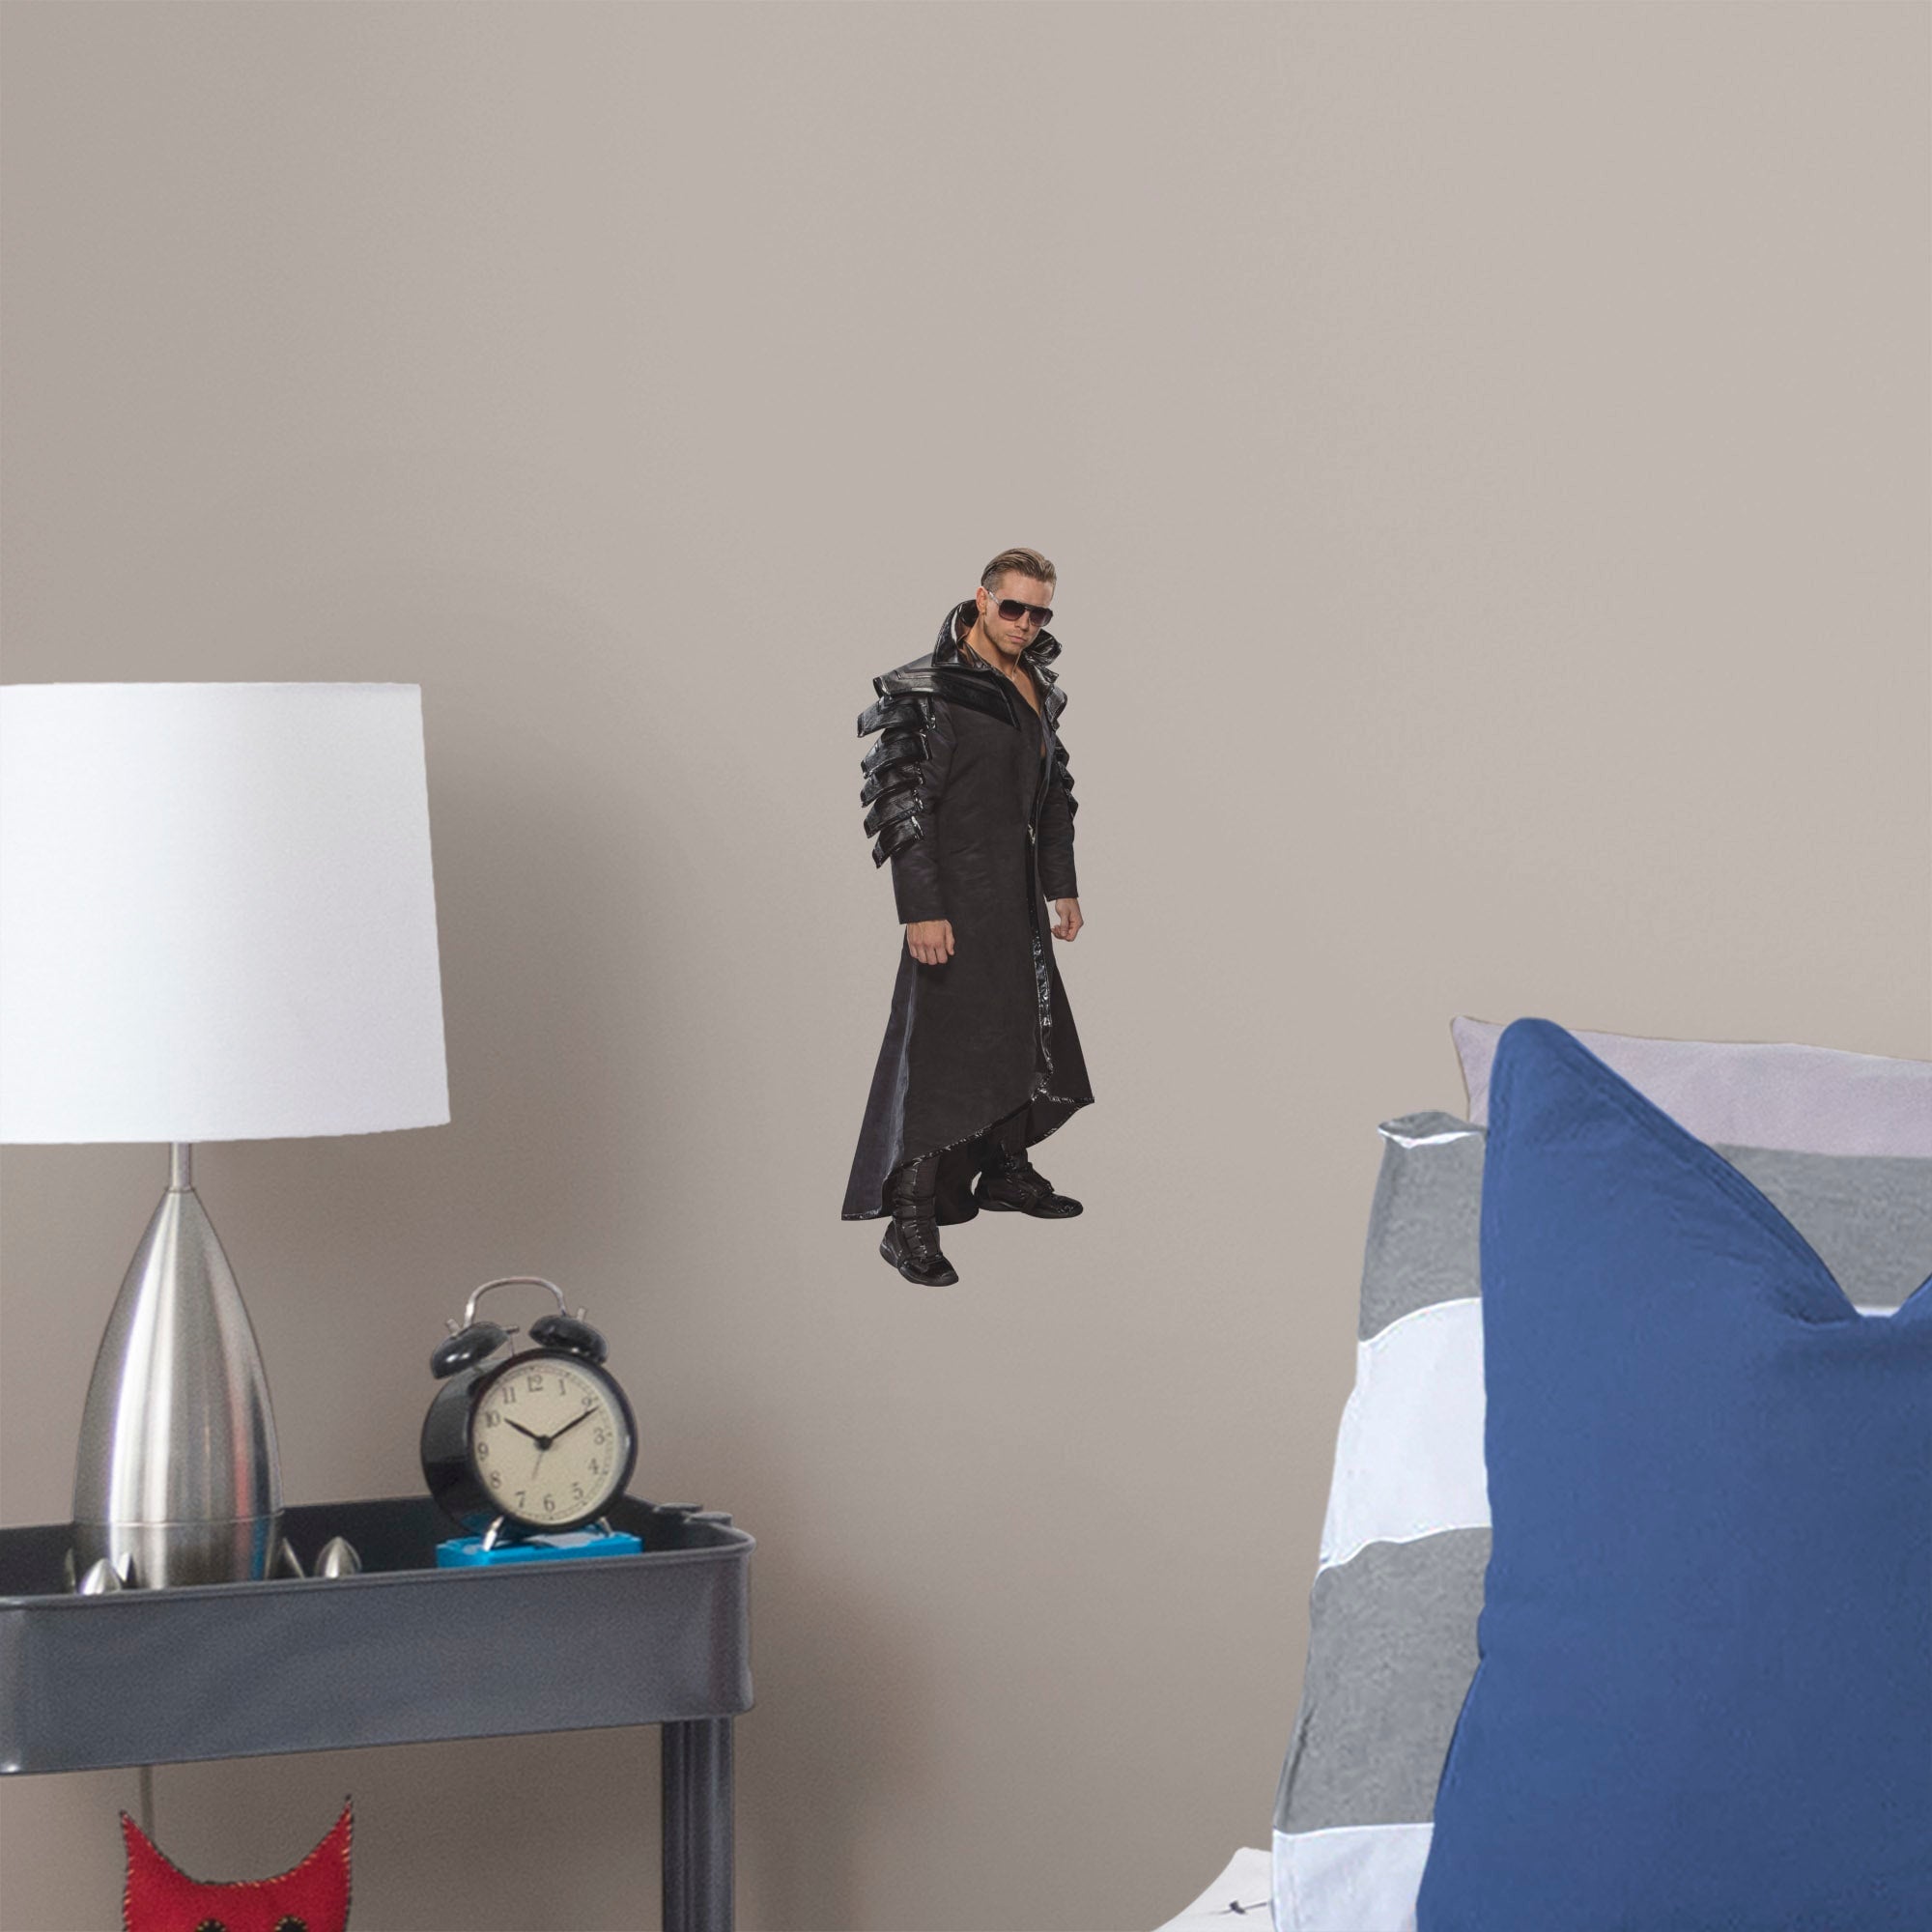 The Miz for WWE - Officially Licensed Removable Wall Decal Large by Fathead | Vinyl